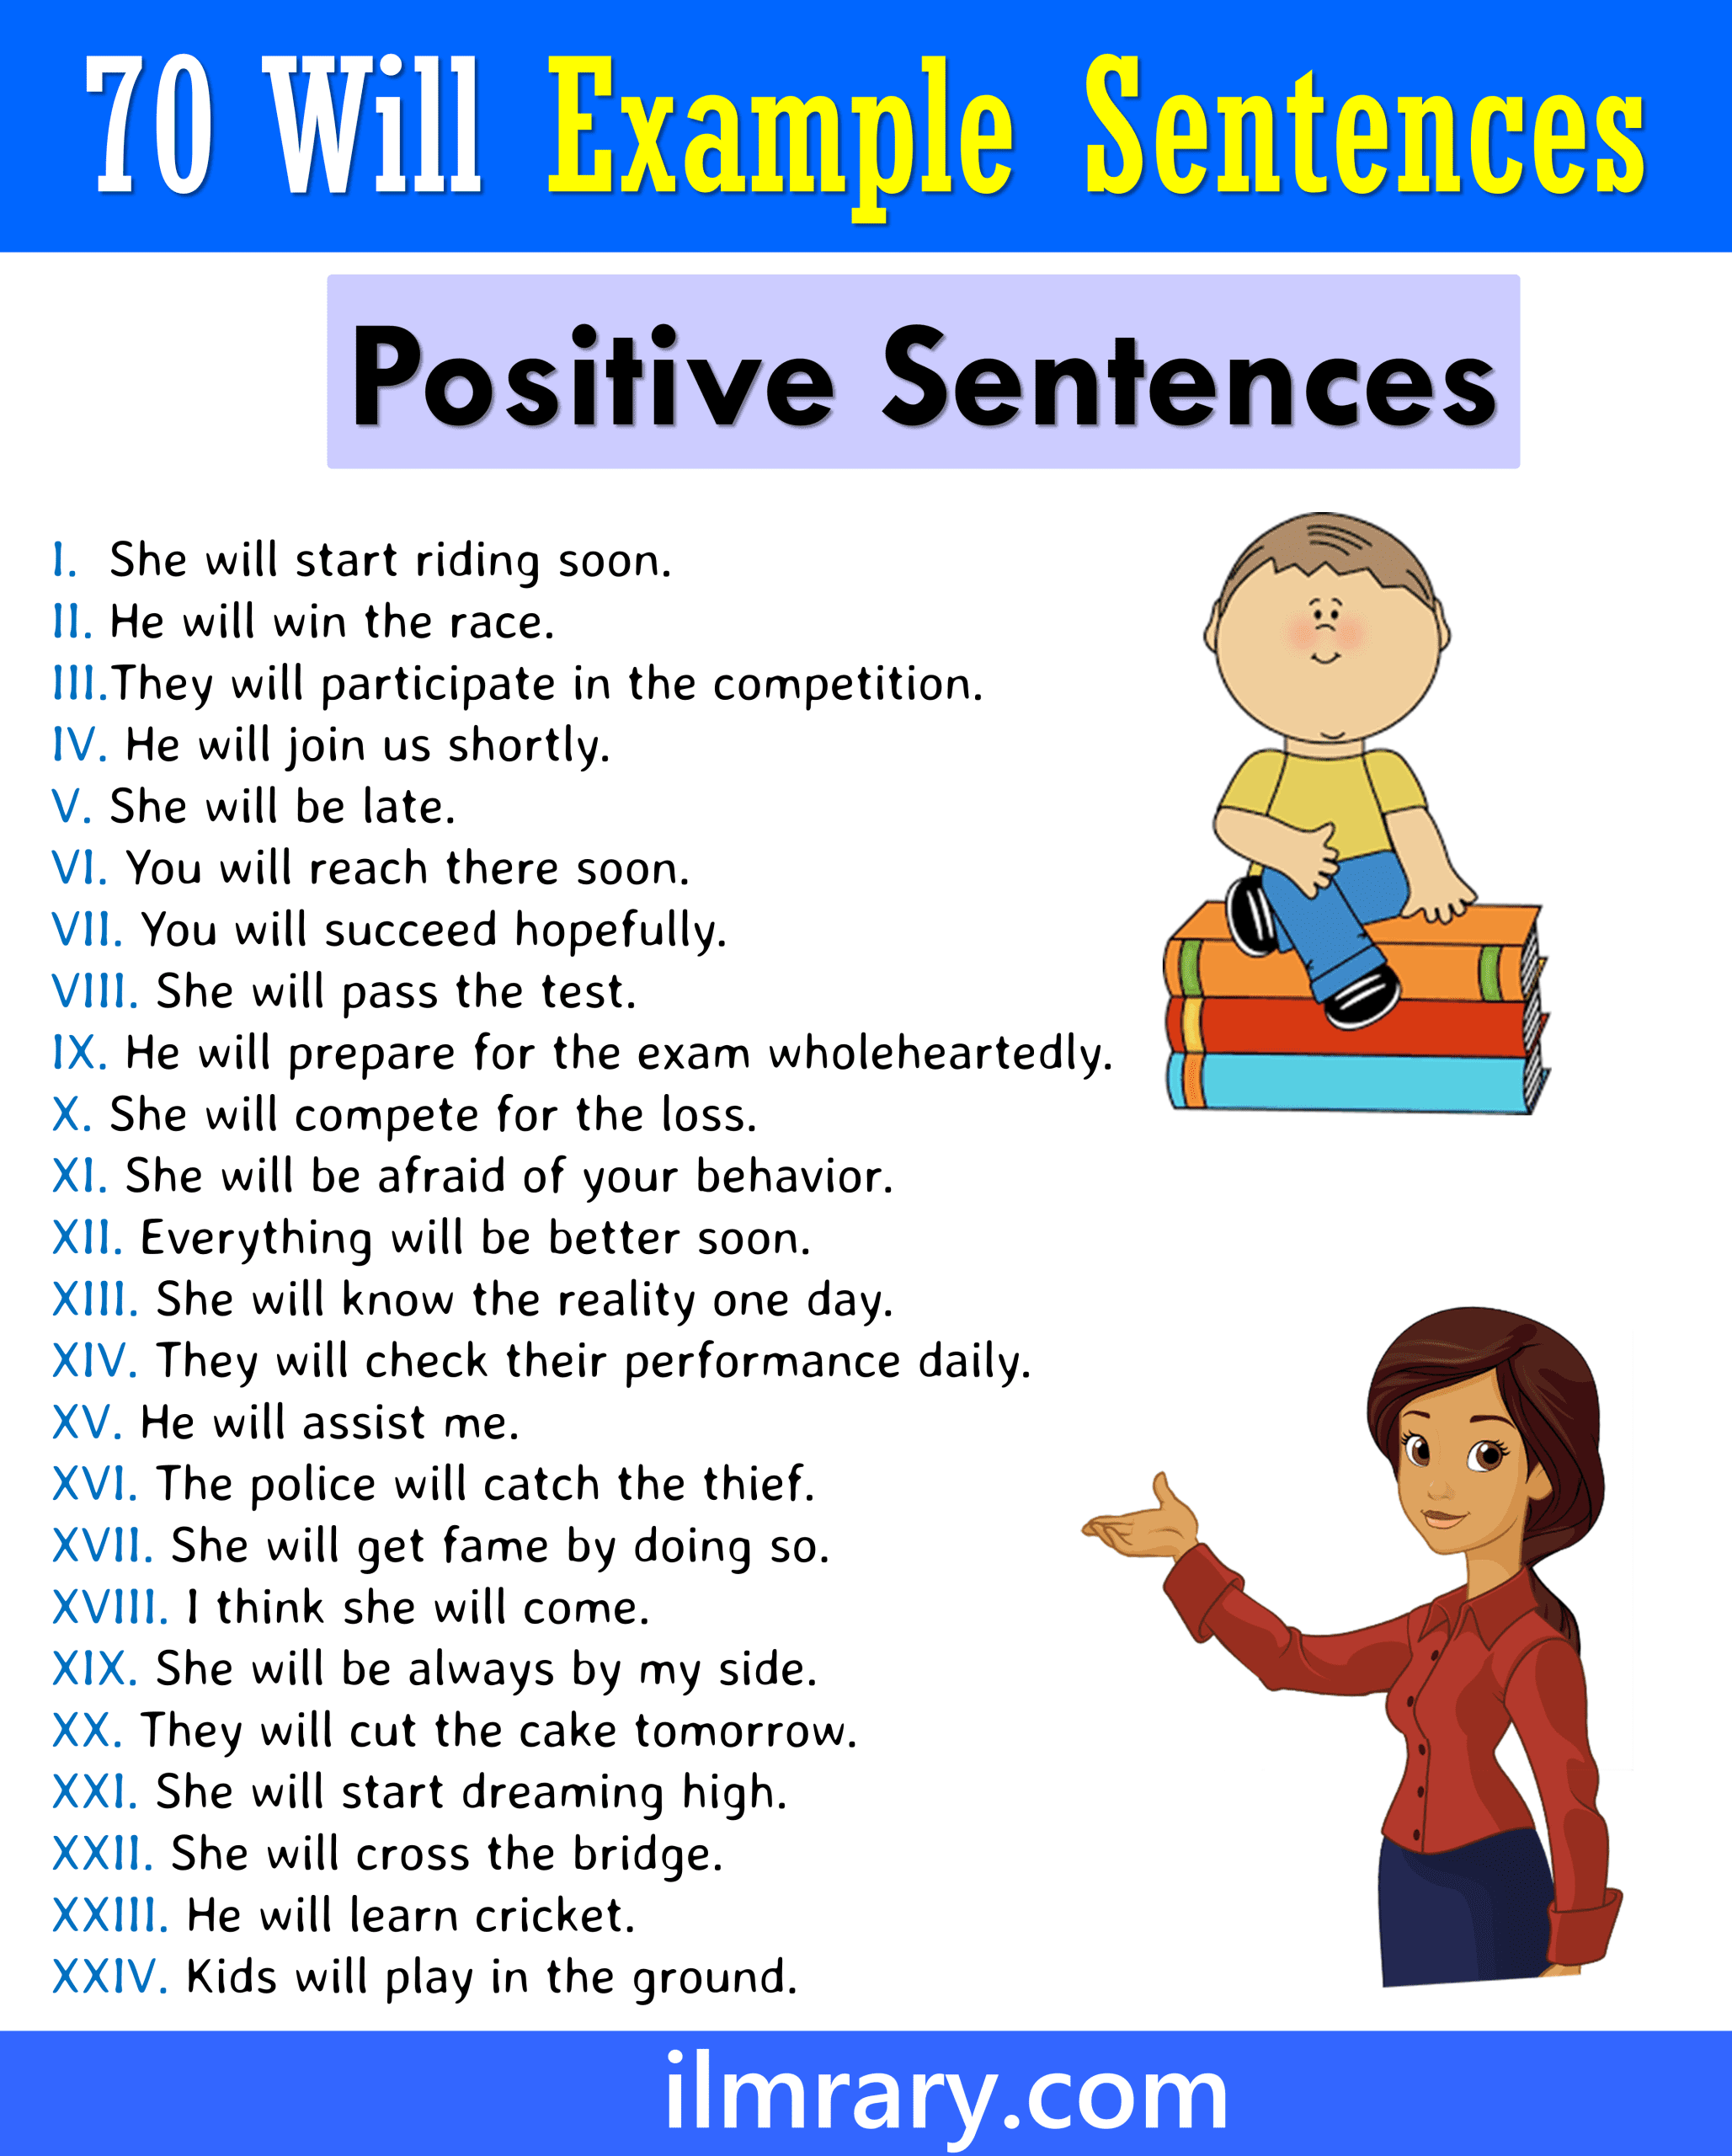 Will Use in Positive Sentences | 70 Example Sentences Using Will